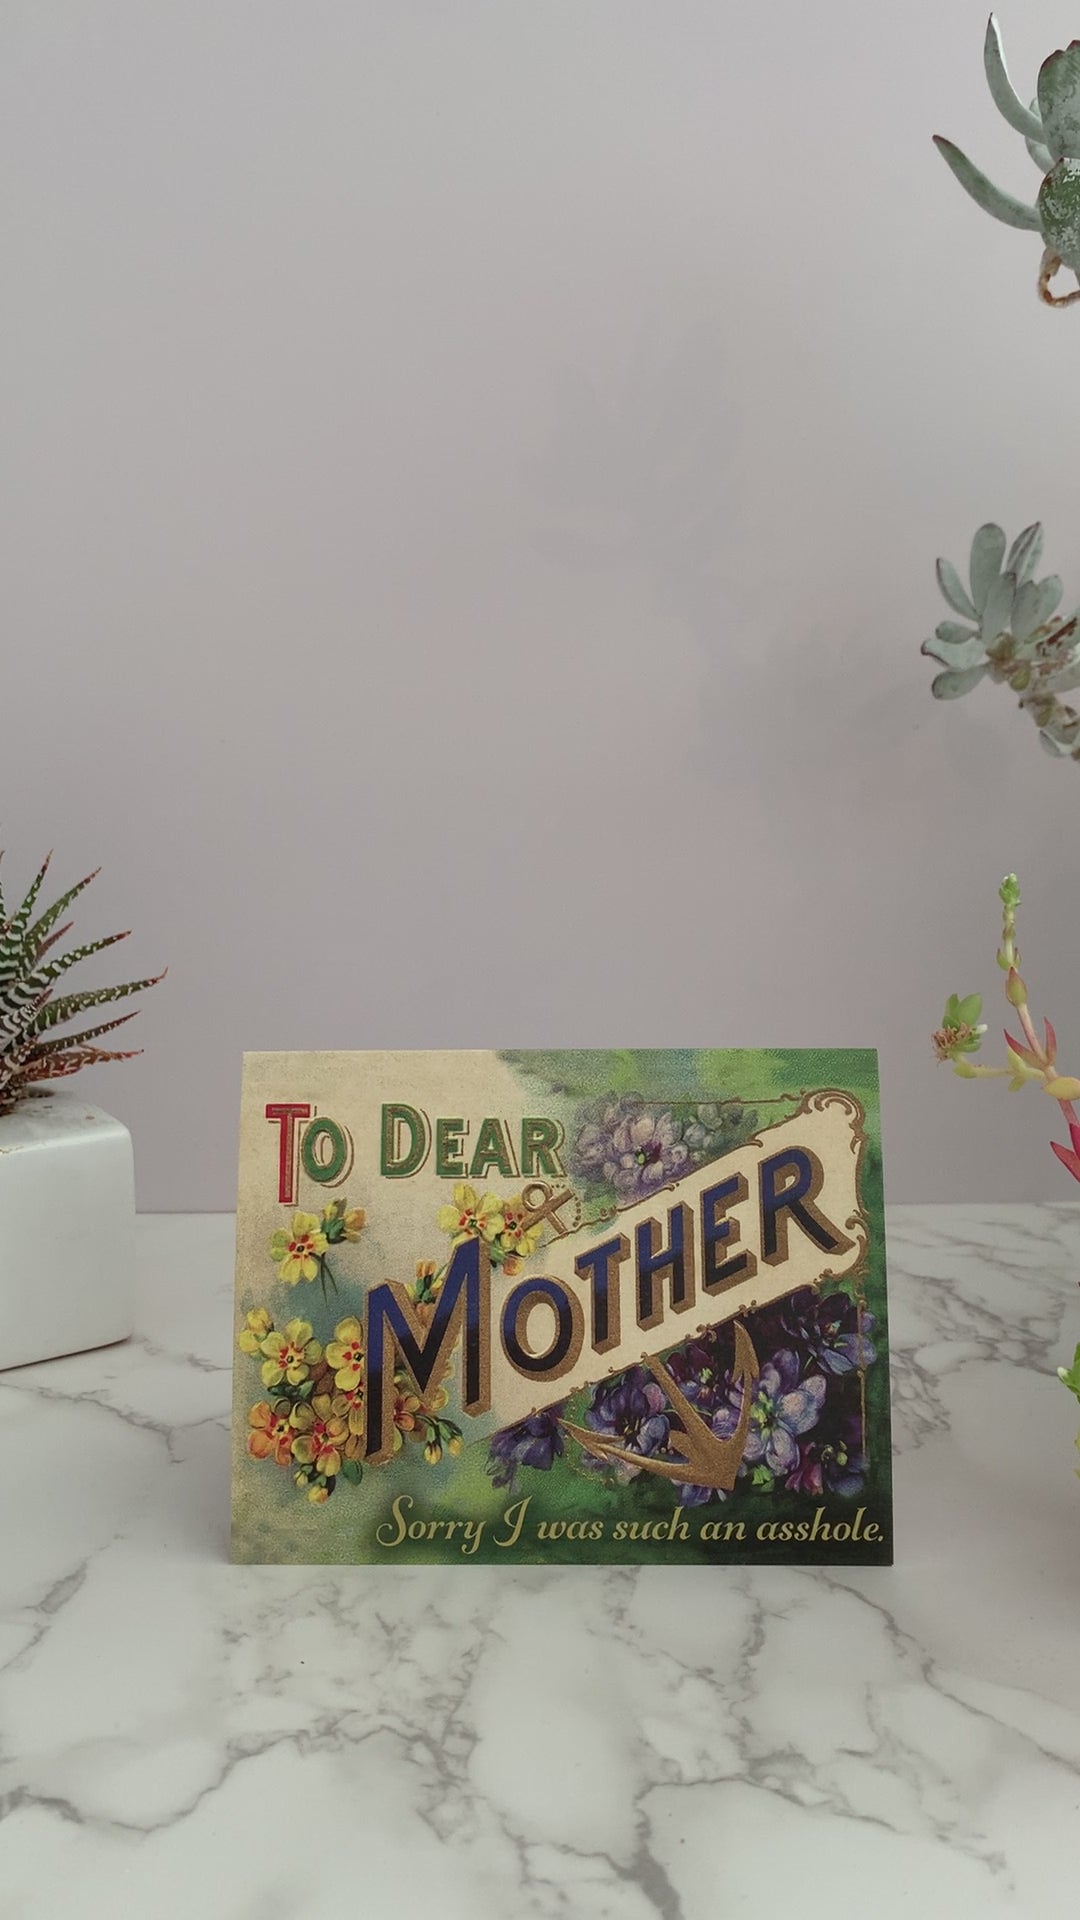 Greeting card with green and yellow background and yellow and purple flowers. Greeting says, "To Dear Mother. Sorry I was such an asshole." Blank inside.